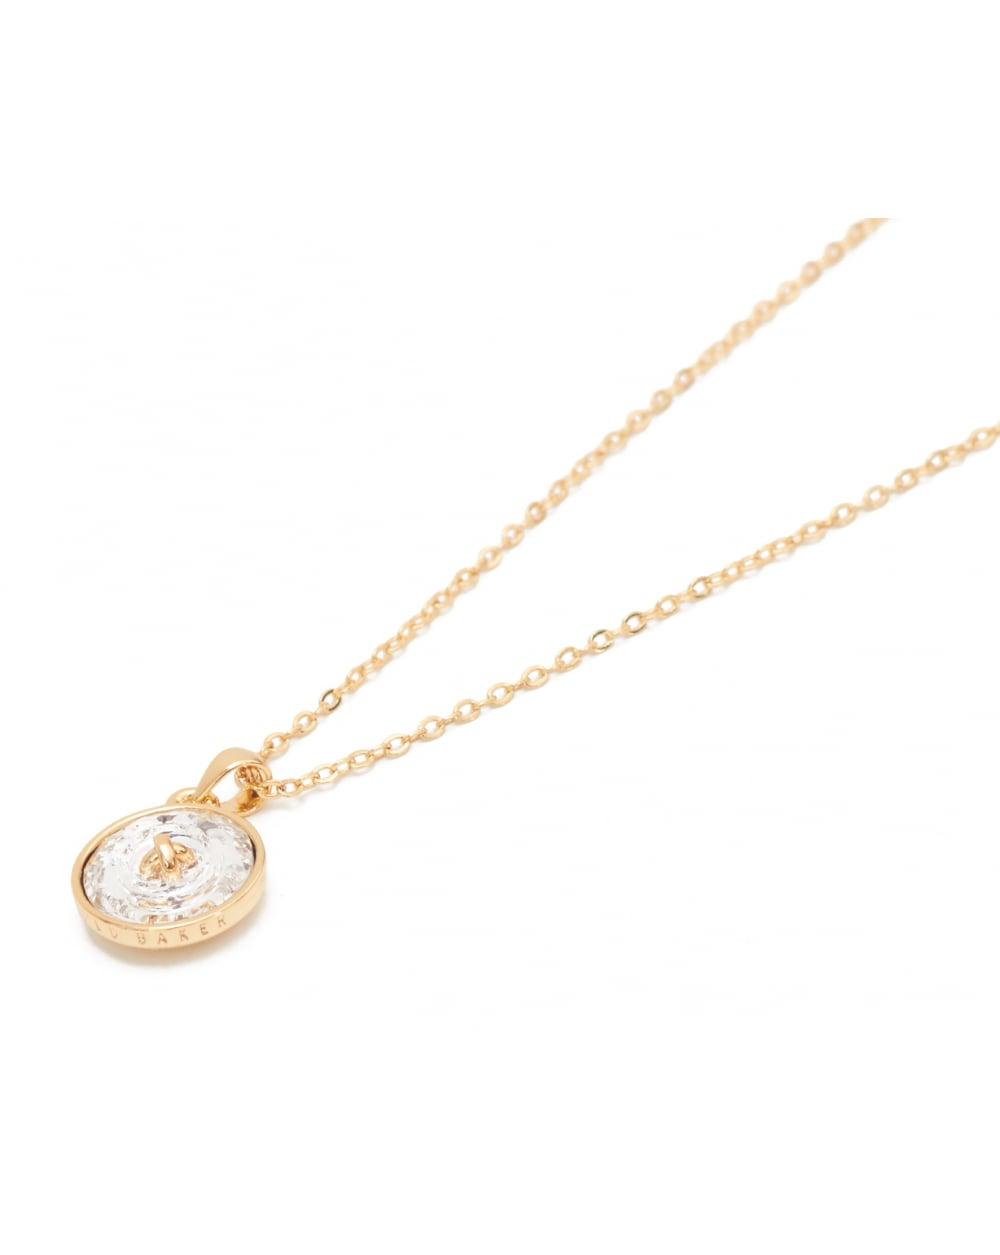 Ted Baker Kenzii Crystal Button Pendant in Gold (Metallic) - Lyst